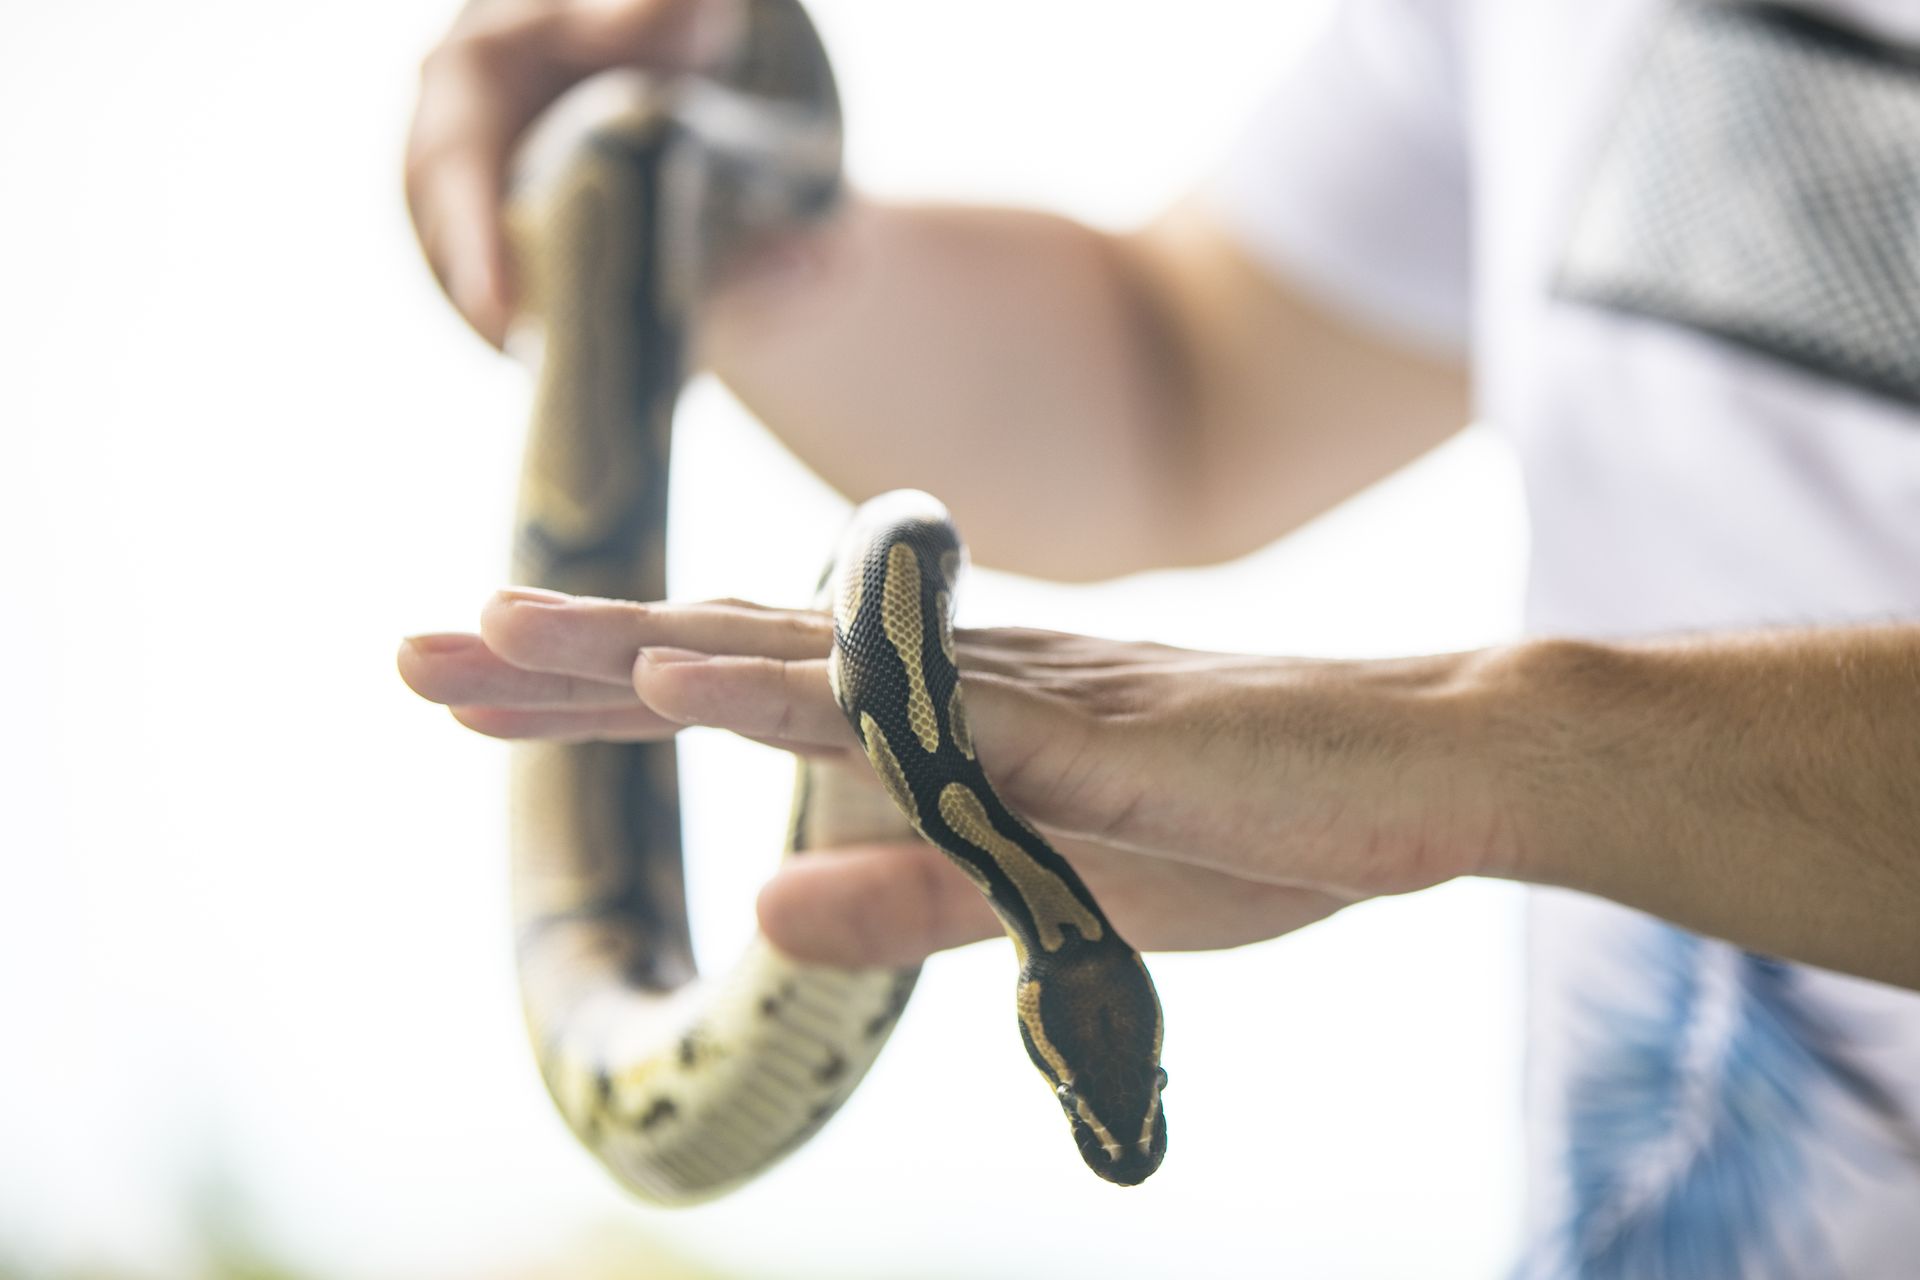 Forbidden and risky: the dangers of having an exotic pet